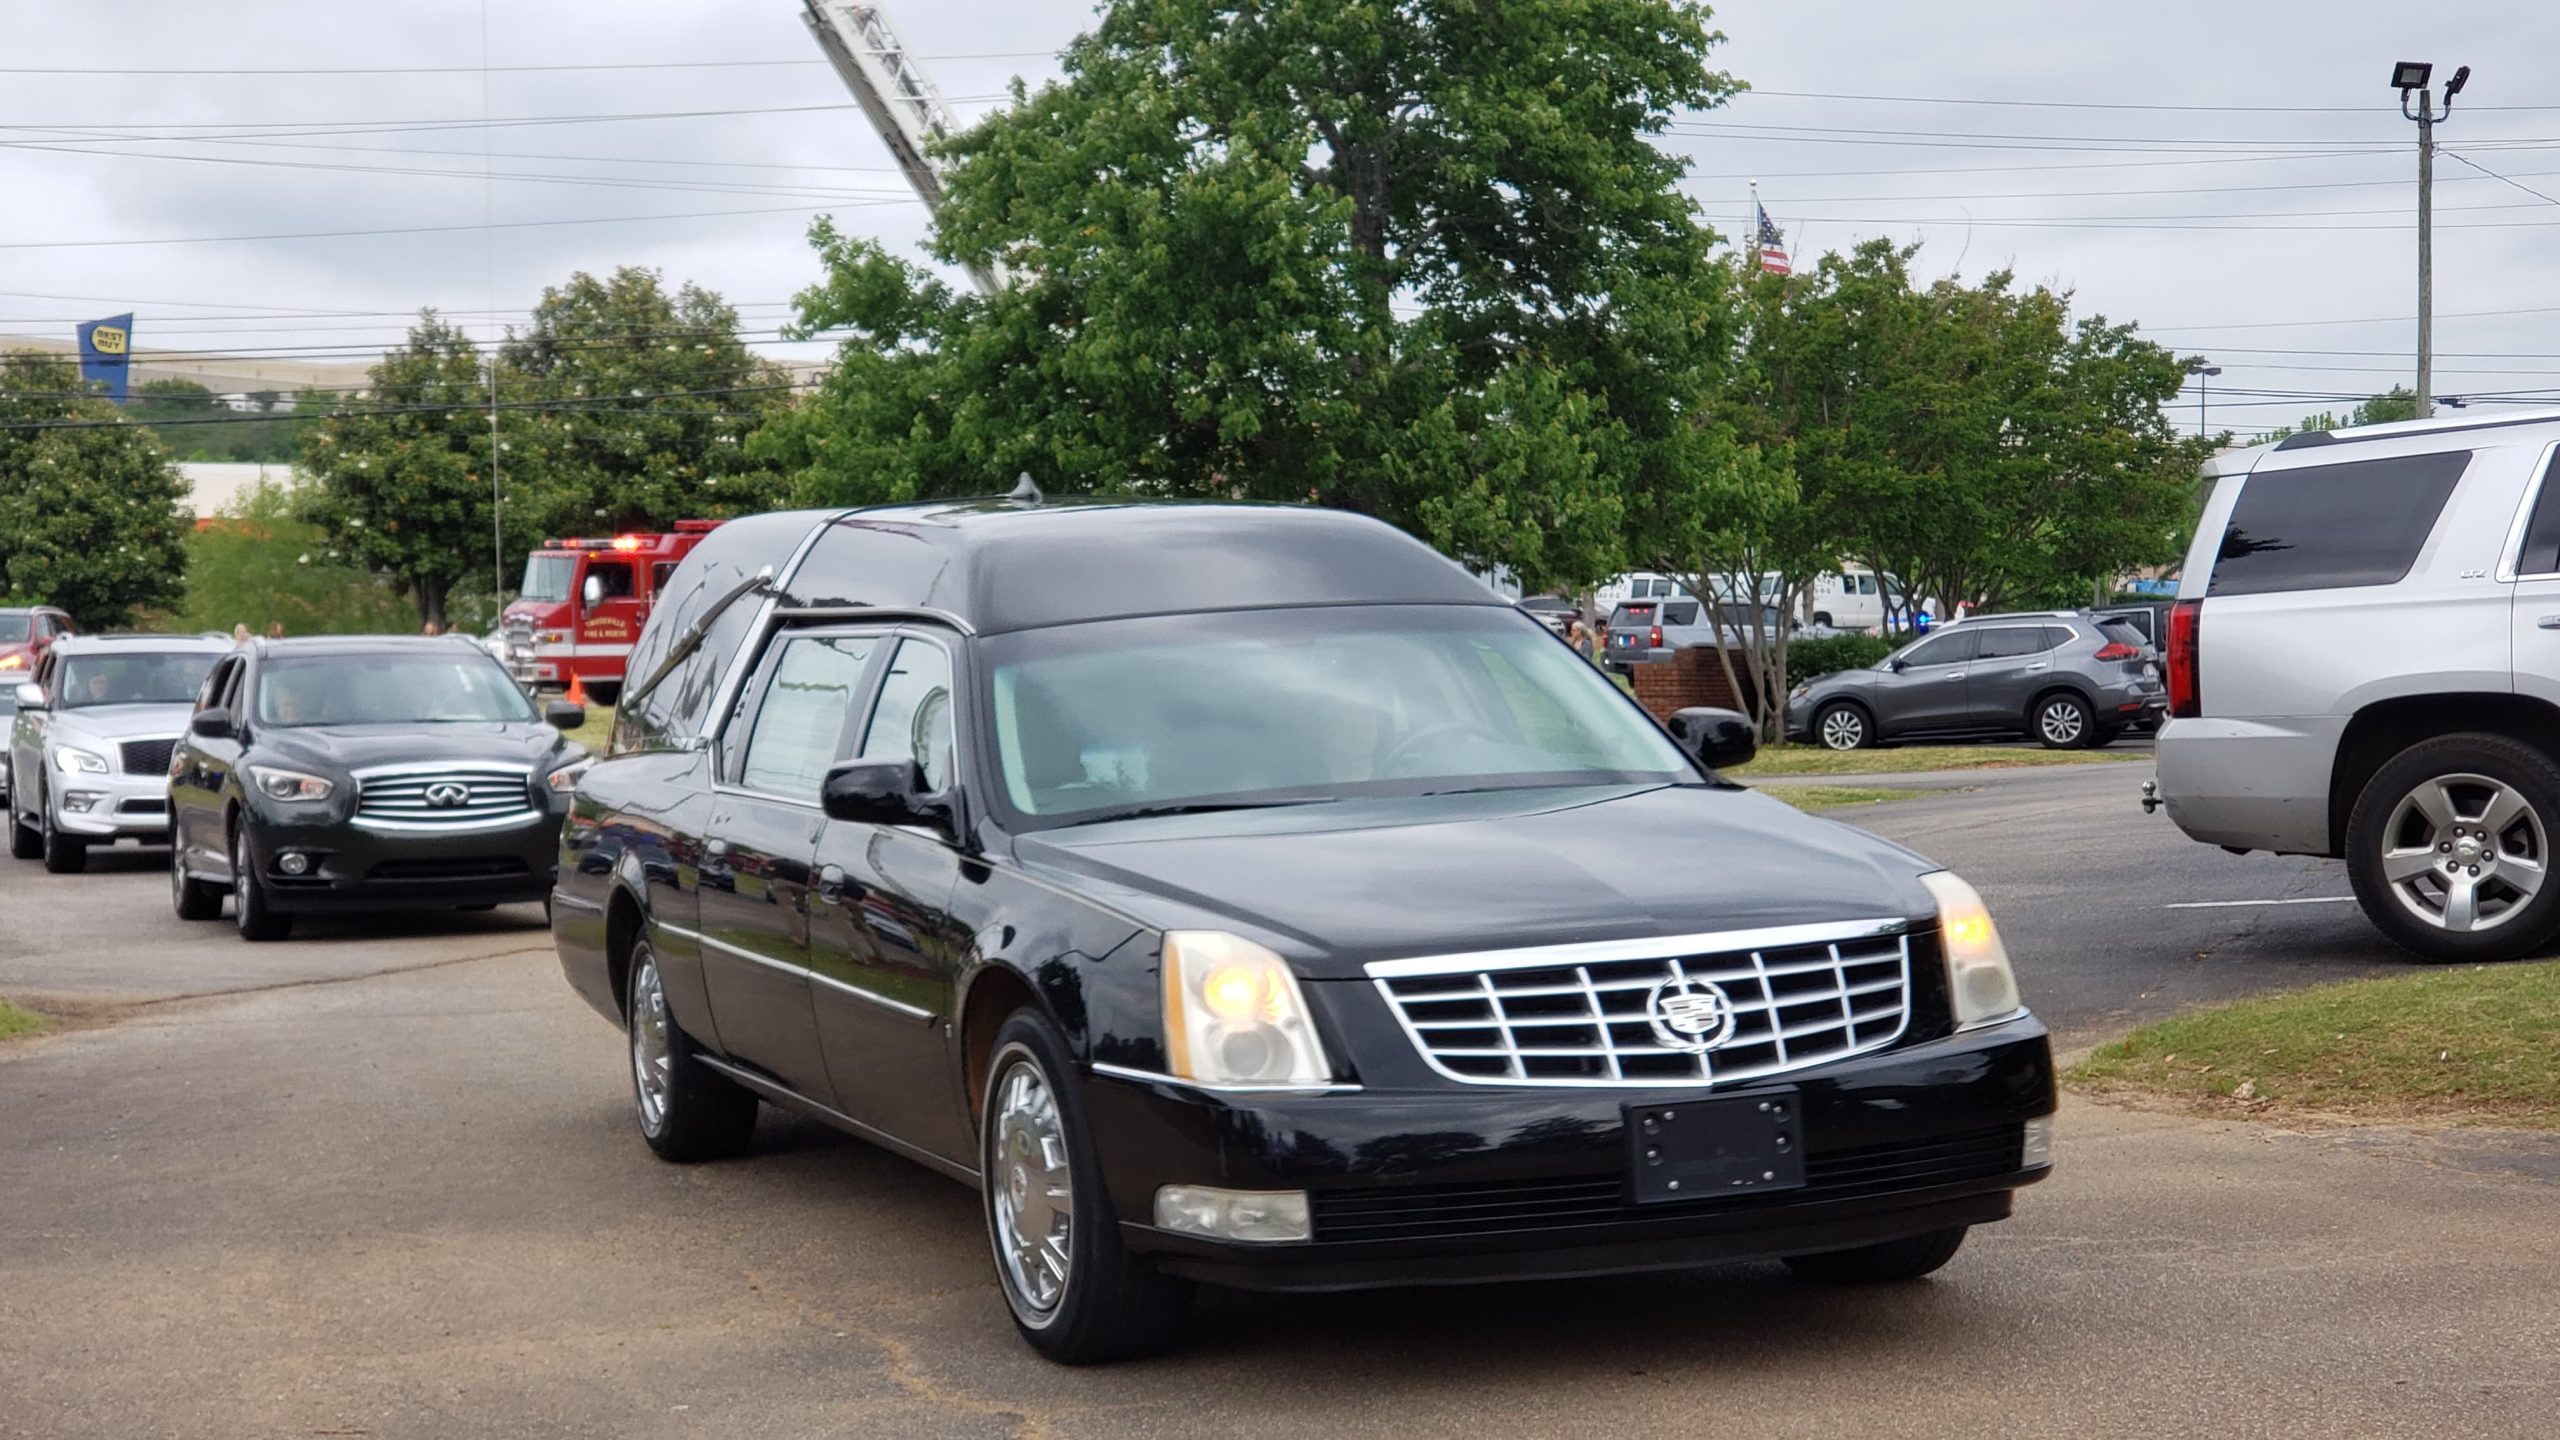 PHOTO GALLERY: Funeral procession and graveside service for former Trussville Police Chief Irving 'Goose' Nash